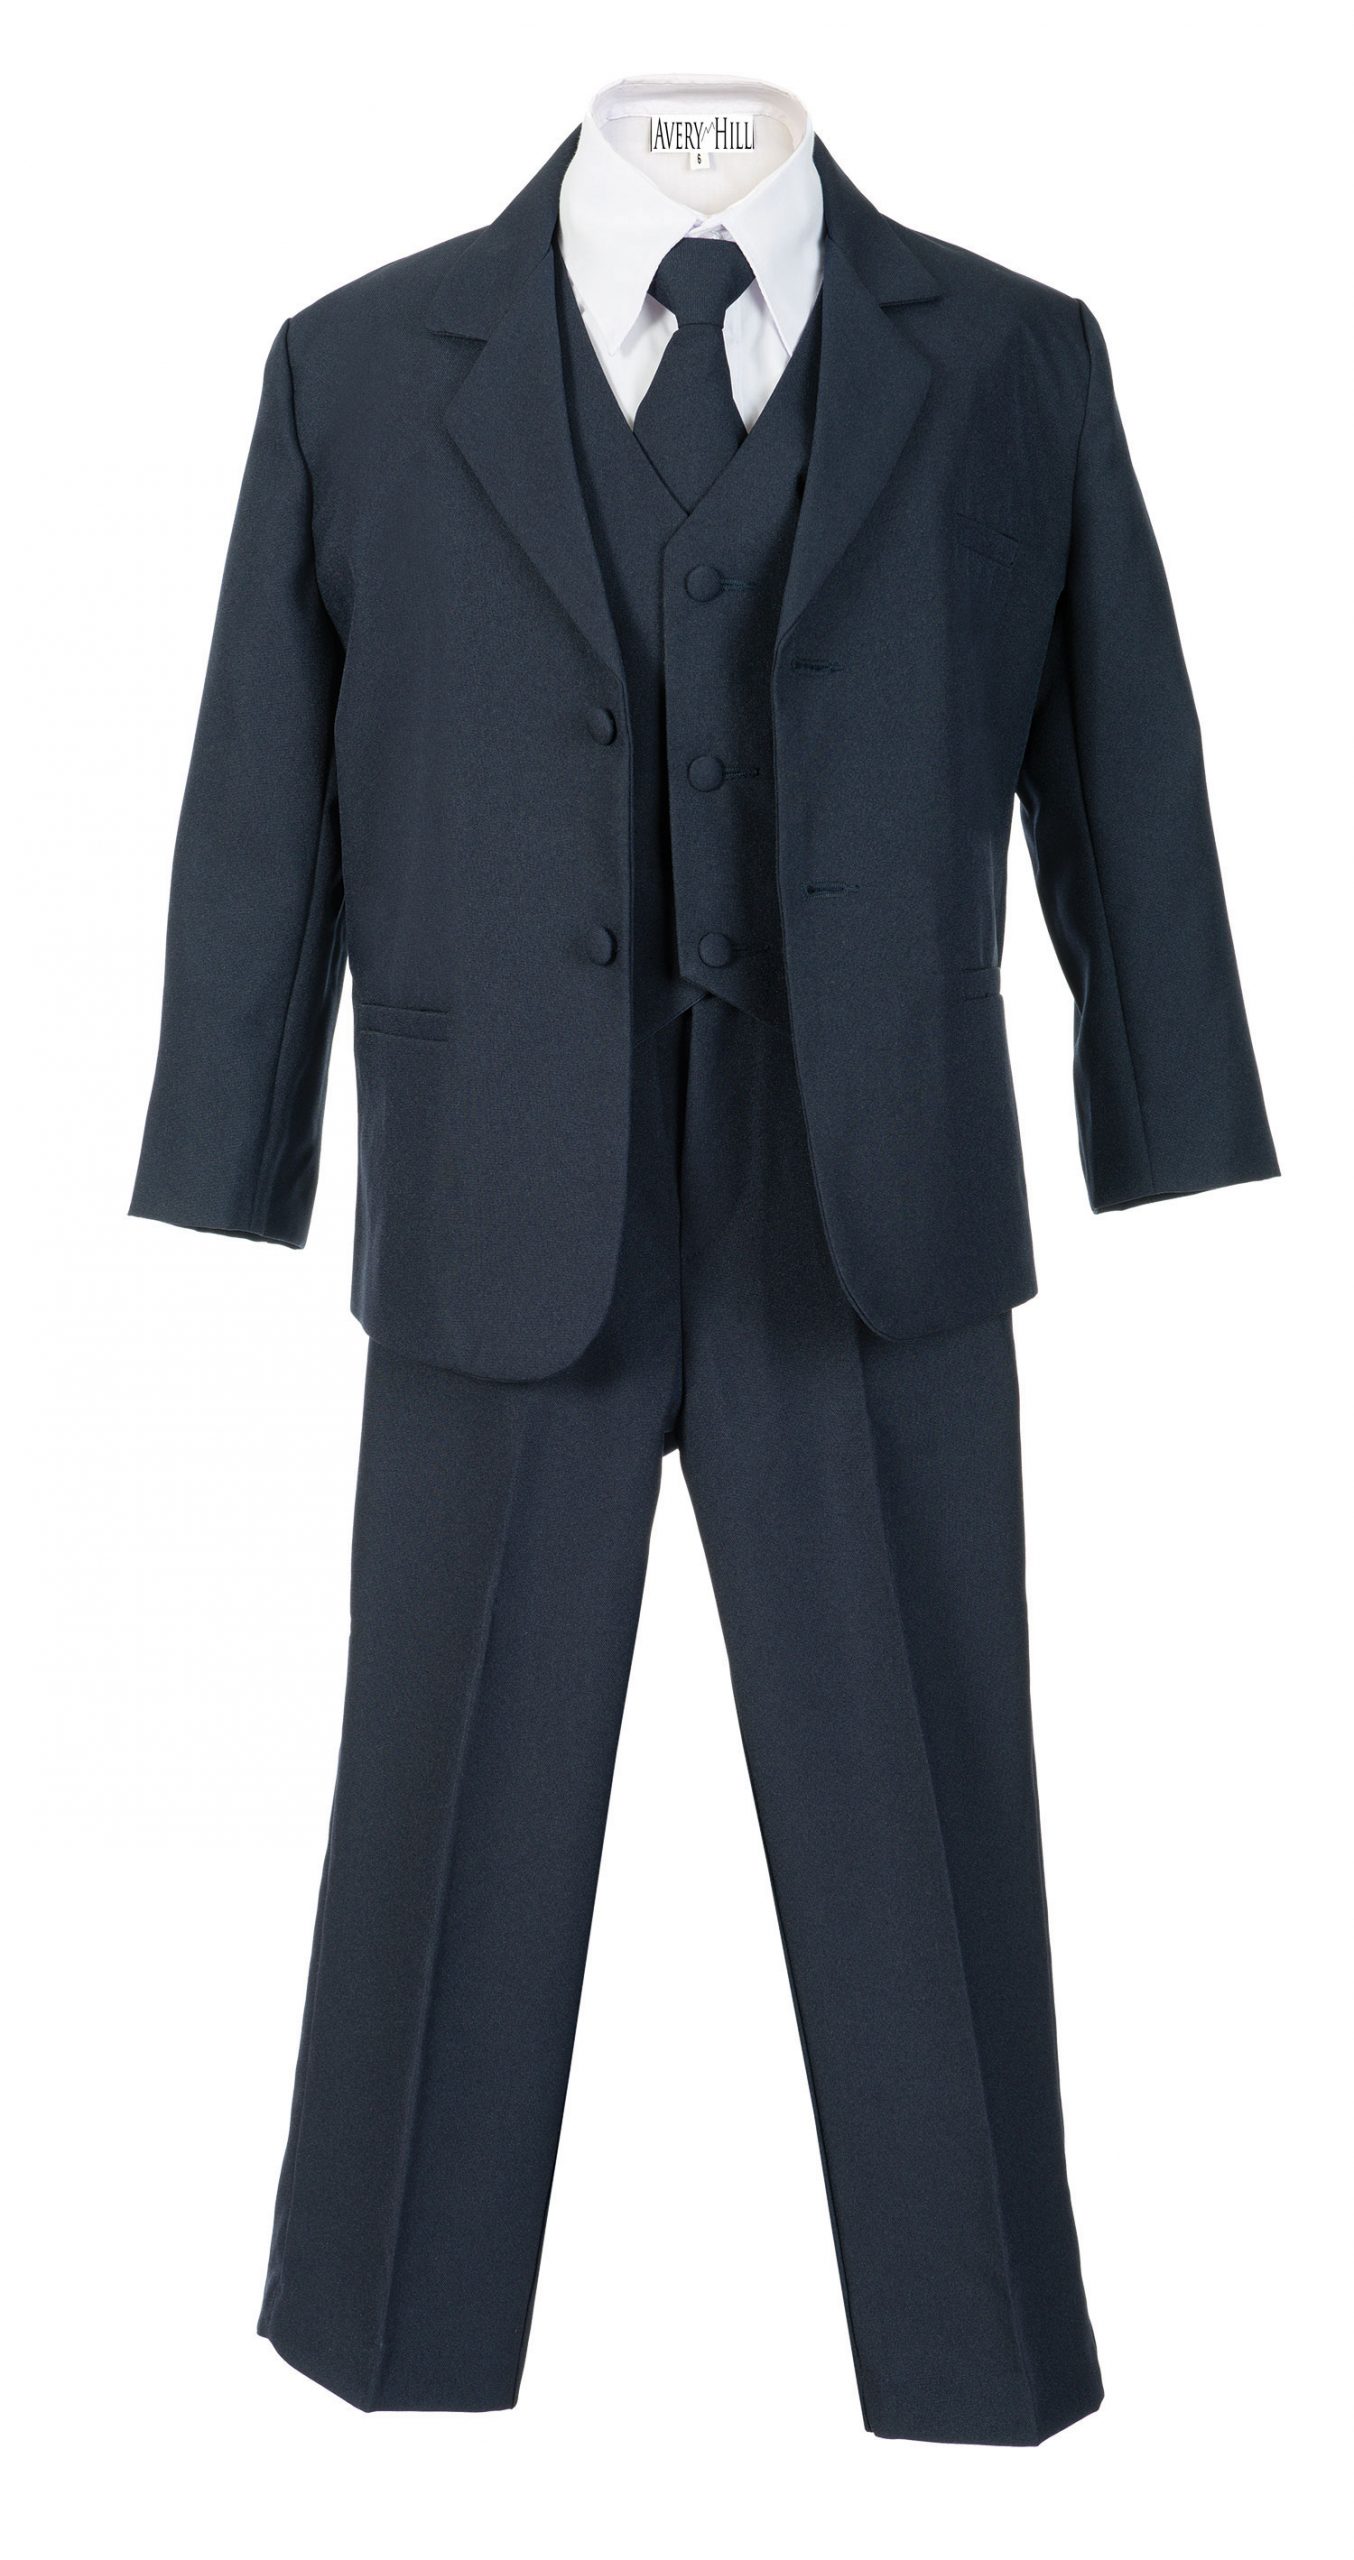 Avery Hill Boys Formal 5 Piece Suit with Shirt and Vest Navy - 18